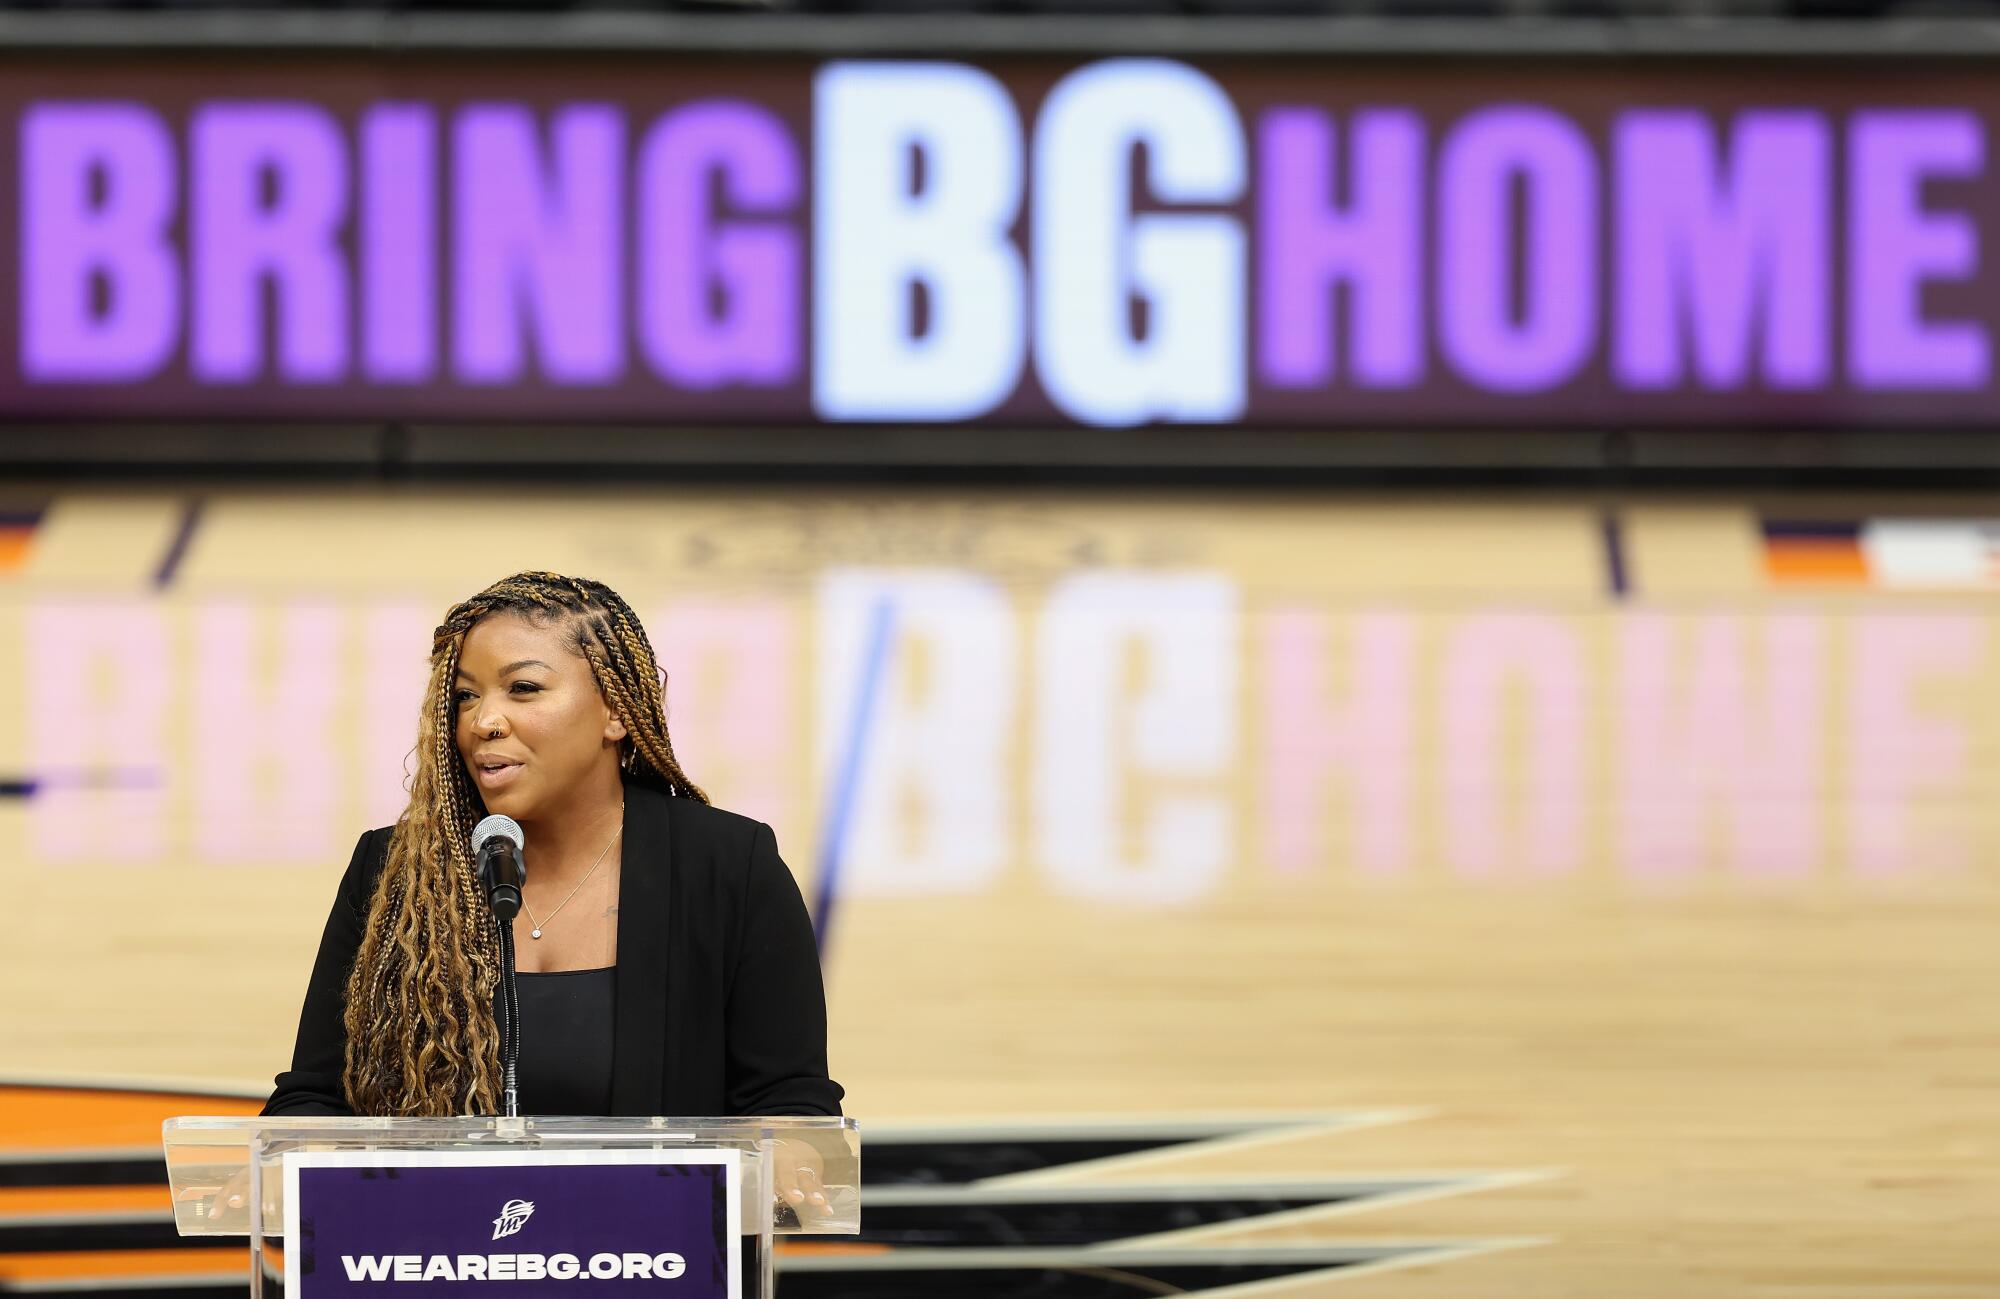 Cherelle Griner, the wife of Brittney Griner, speaks during a rally to support the release of Britney Griner.